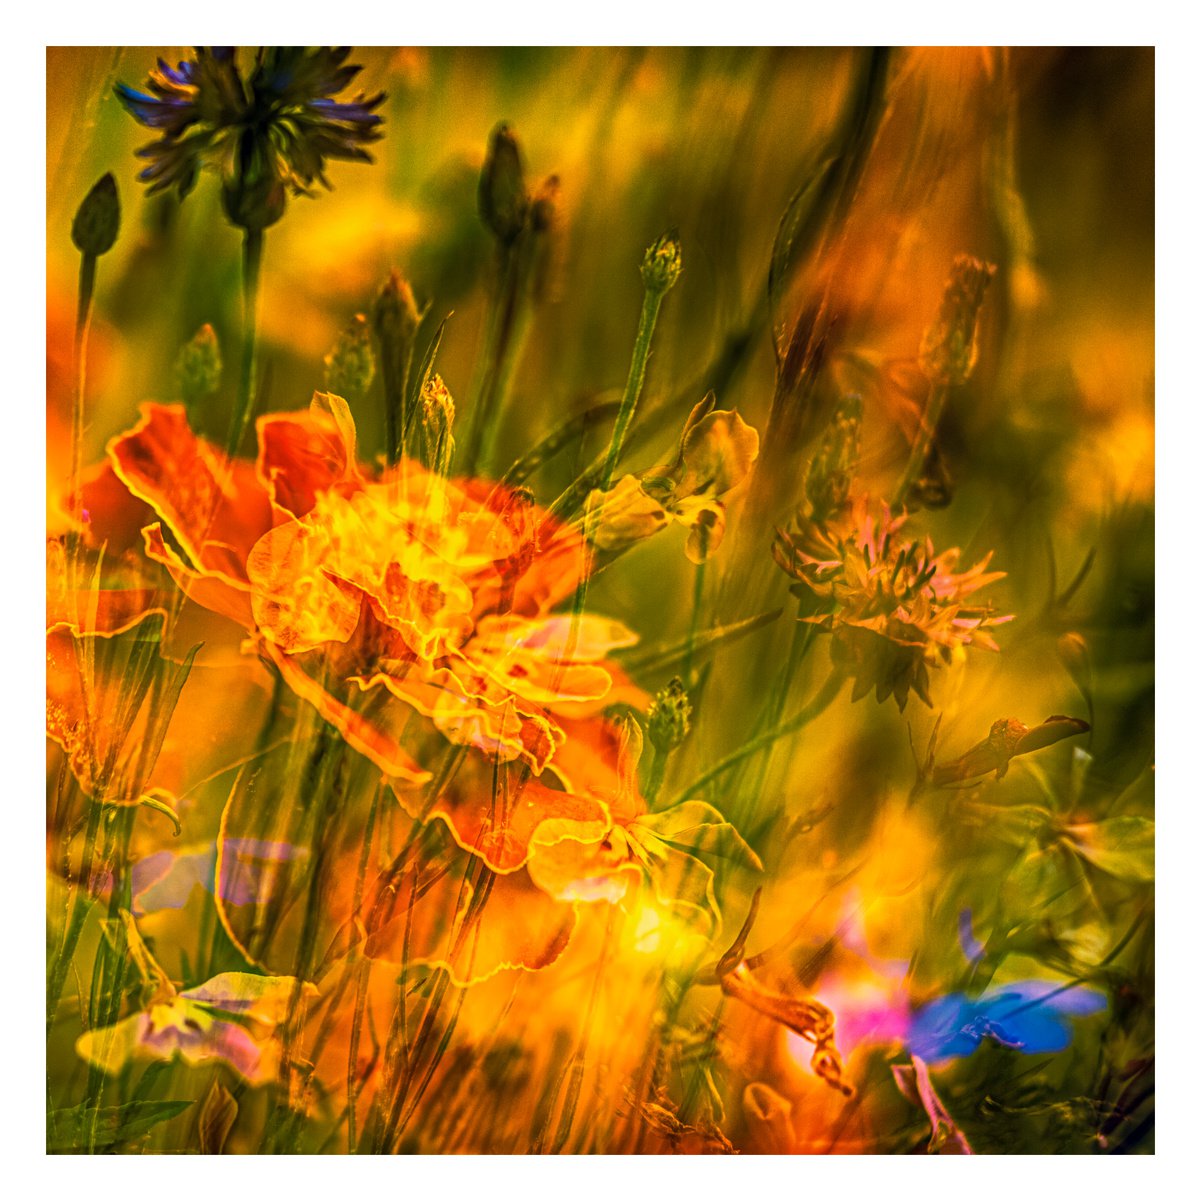 Summer Meadows #2. Limited Edition 1/25 12x12 inch Abstract Photographic Print. by Graham Briggs